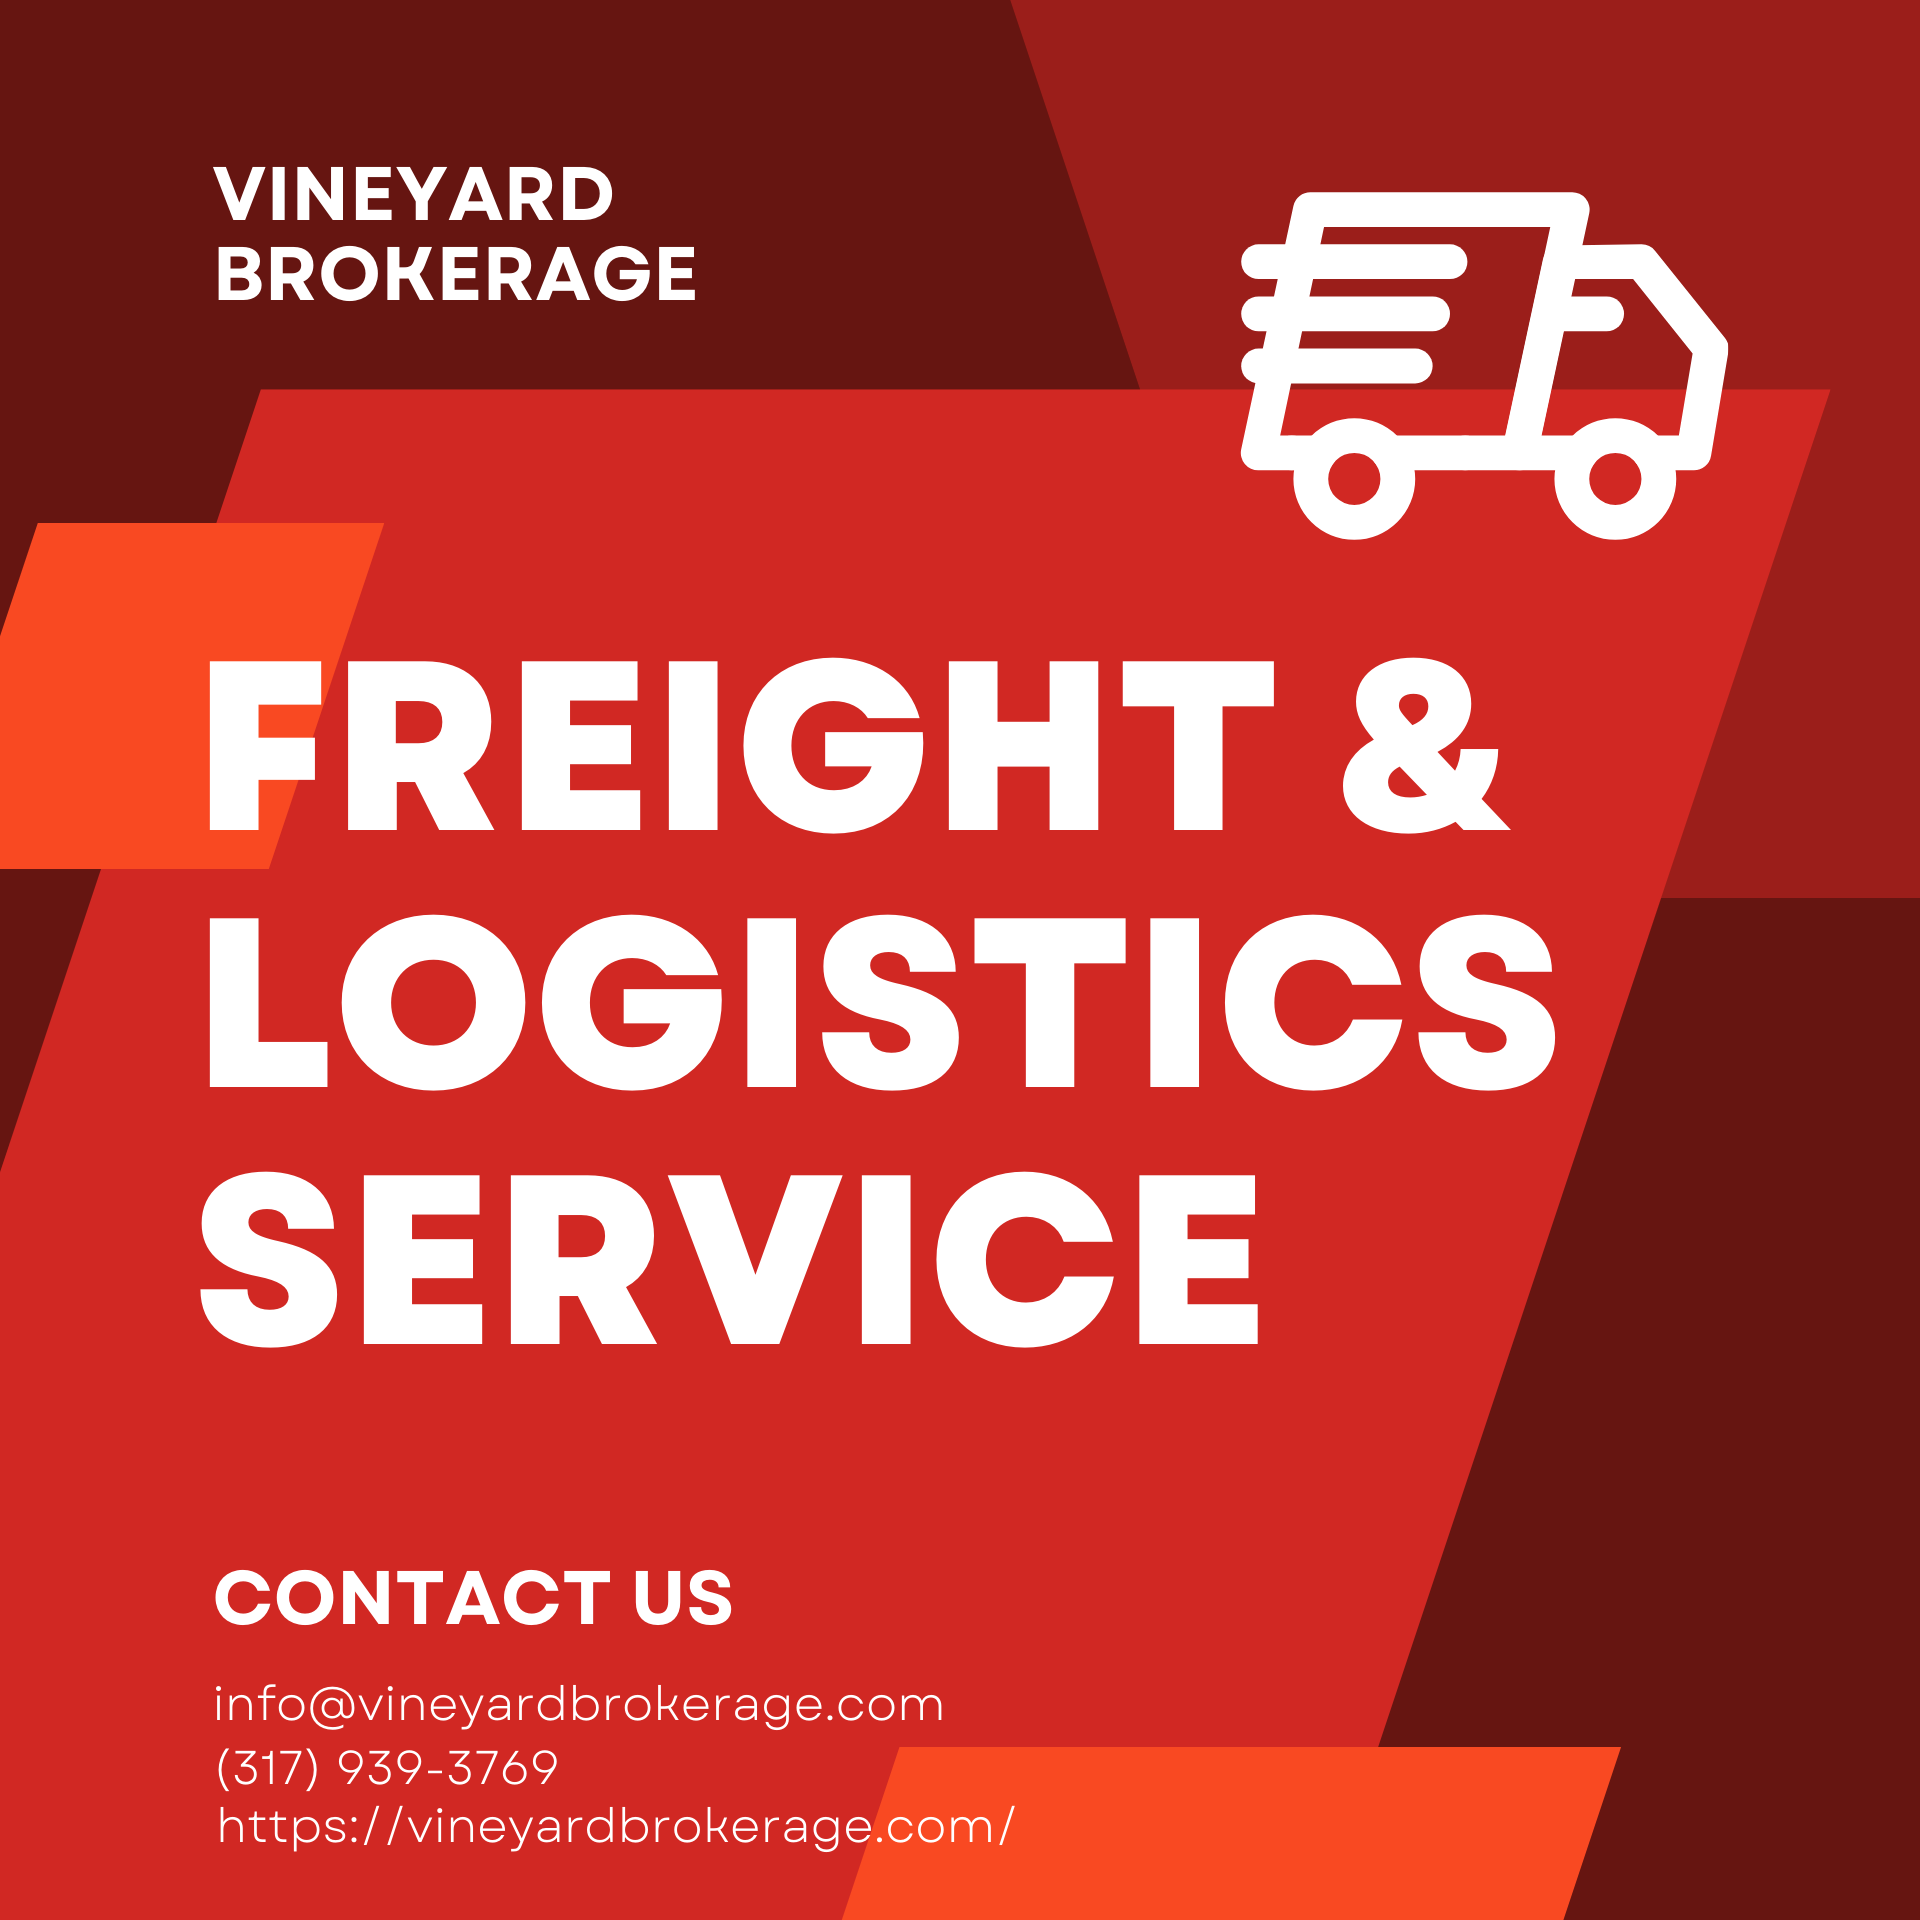 Are You Searching for Freight & Logistics Services Around You? Meet Vineyard Brokerage!